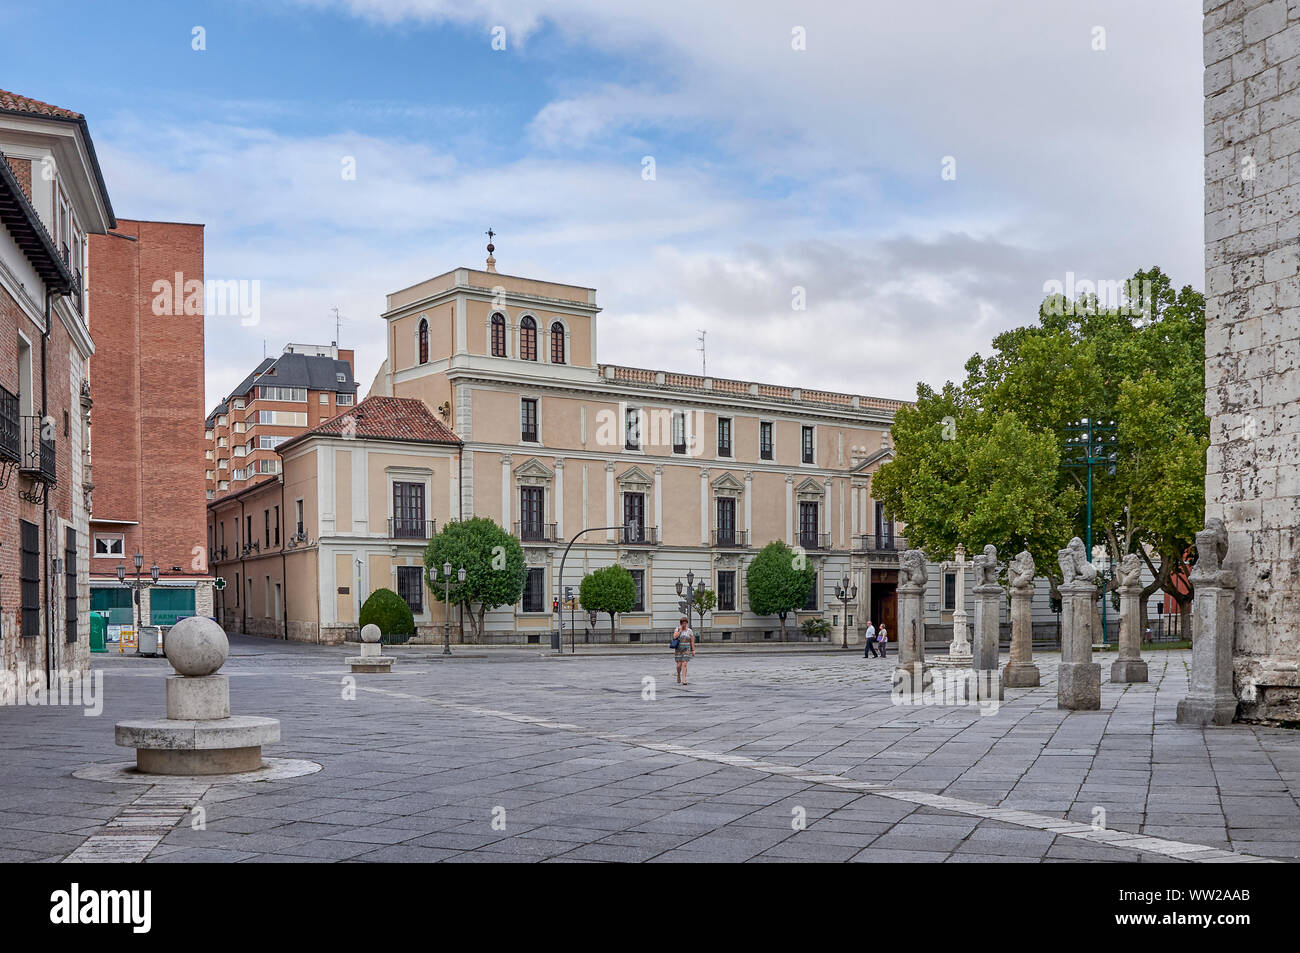 Royal Palace of Valladolid former official residence of the Kings of Spain when Valladolid was the seat of the Court. Located in St. Paul's Square Stock Photo